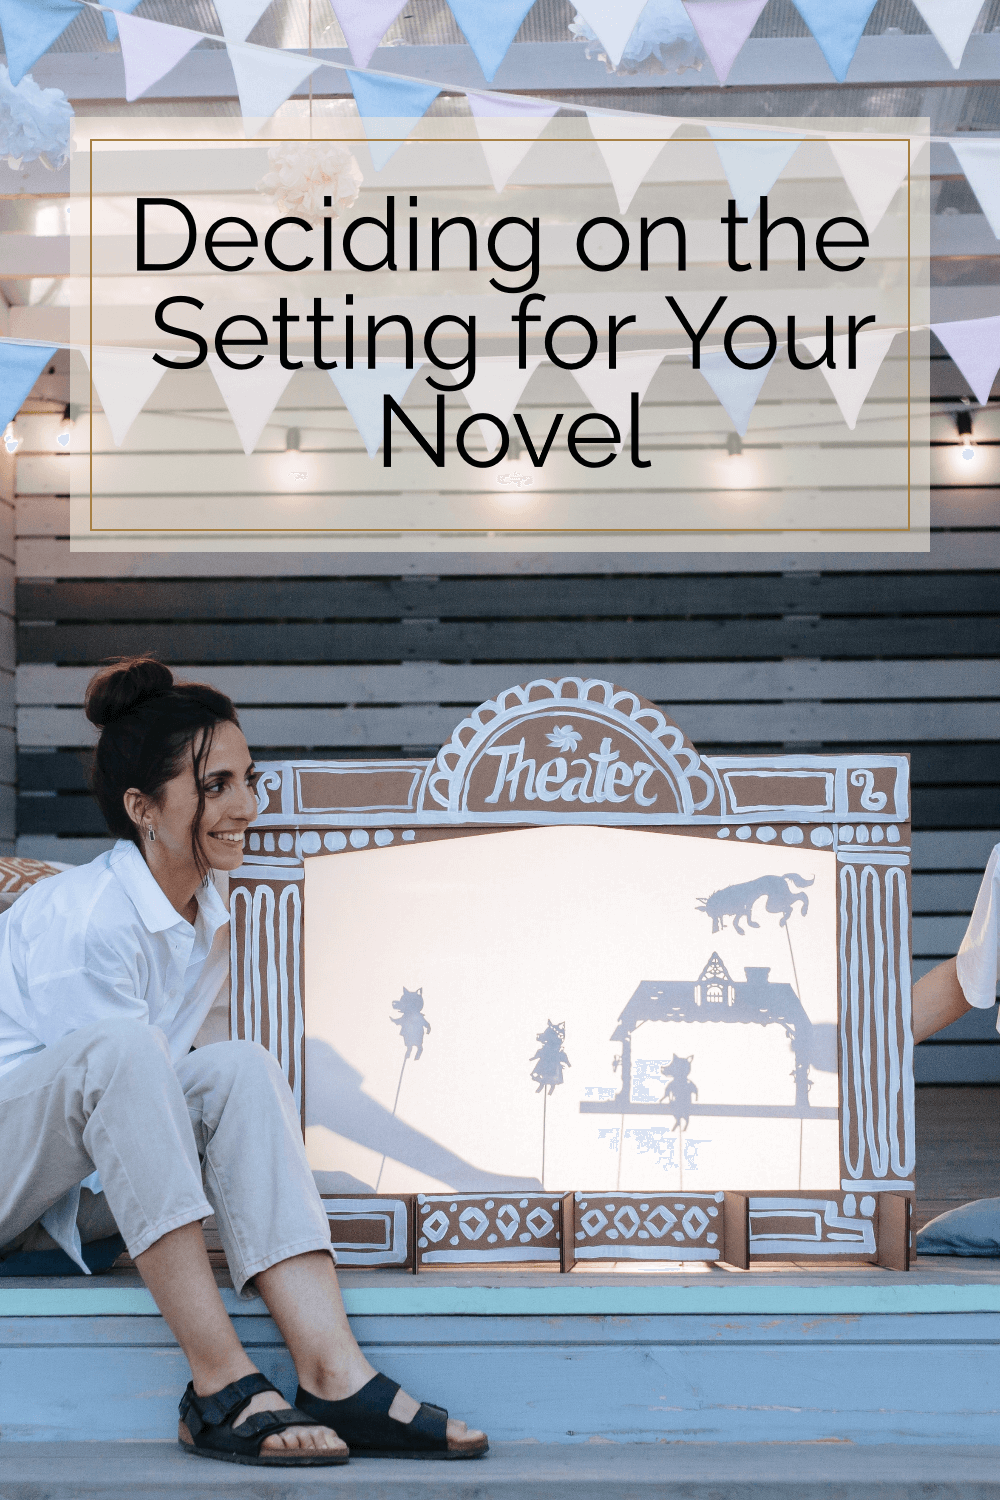 How to decide on the setting of a novel you're working on.